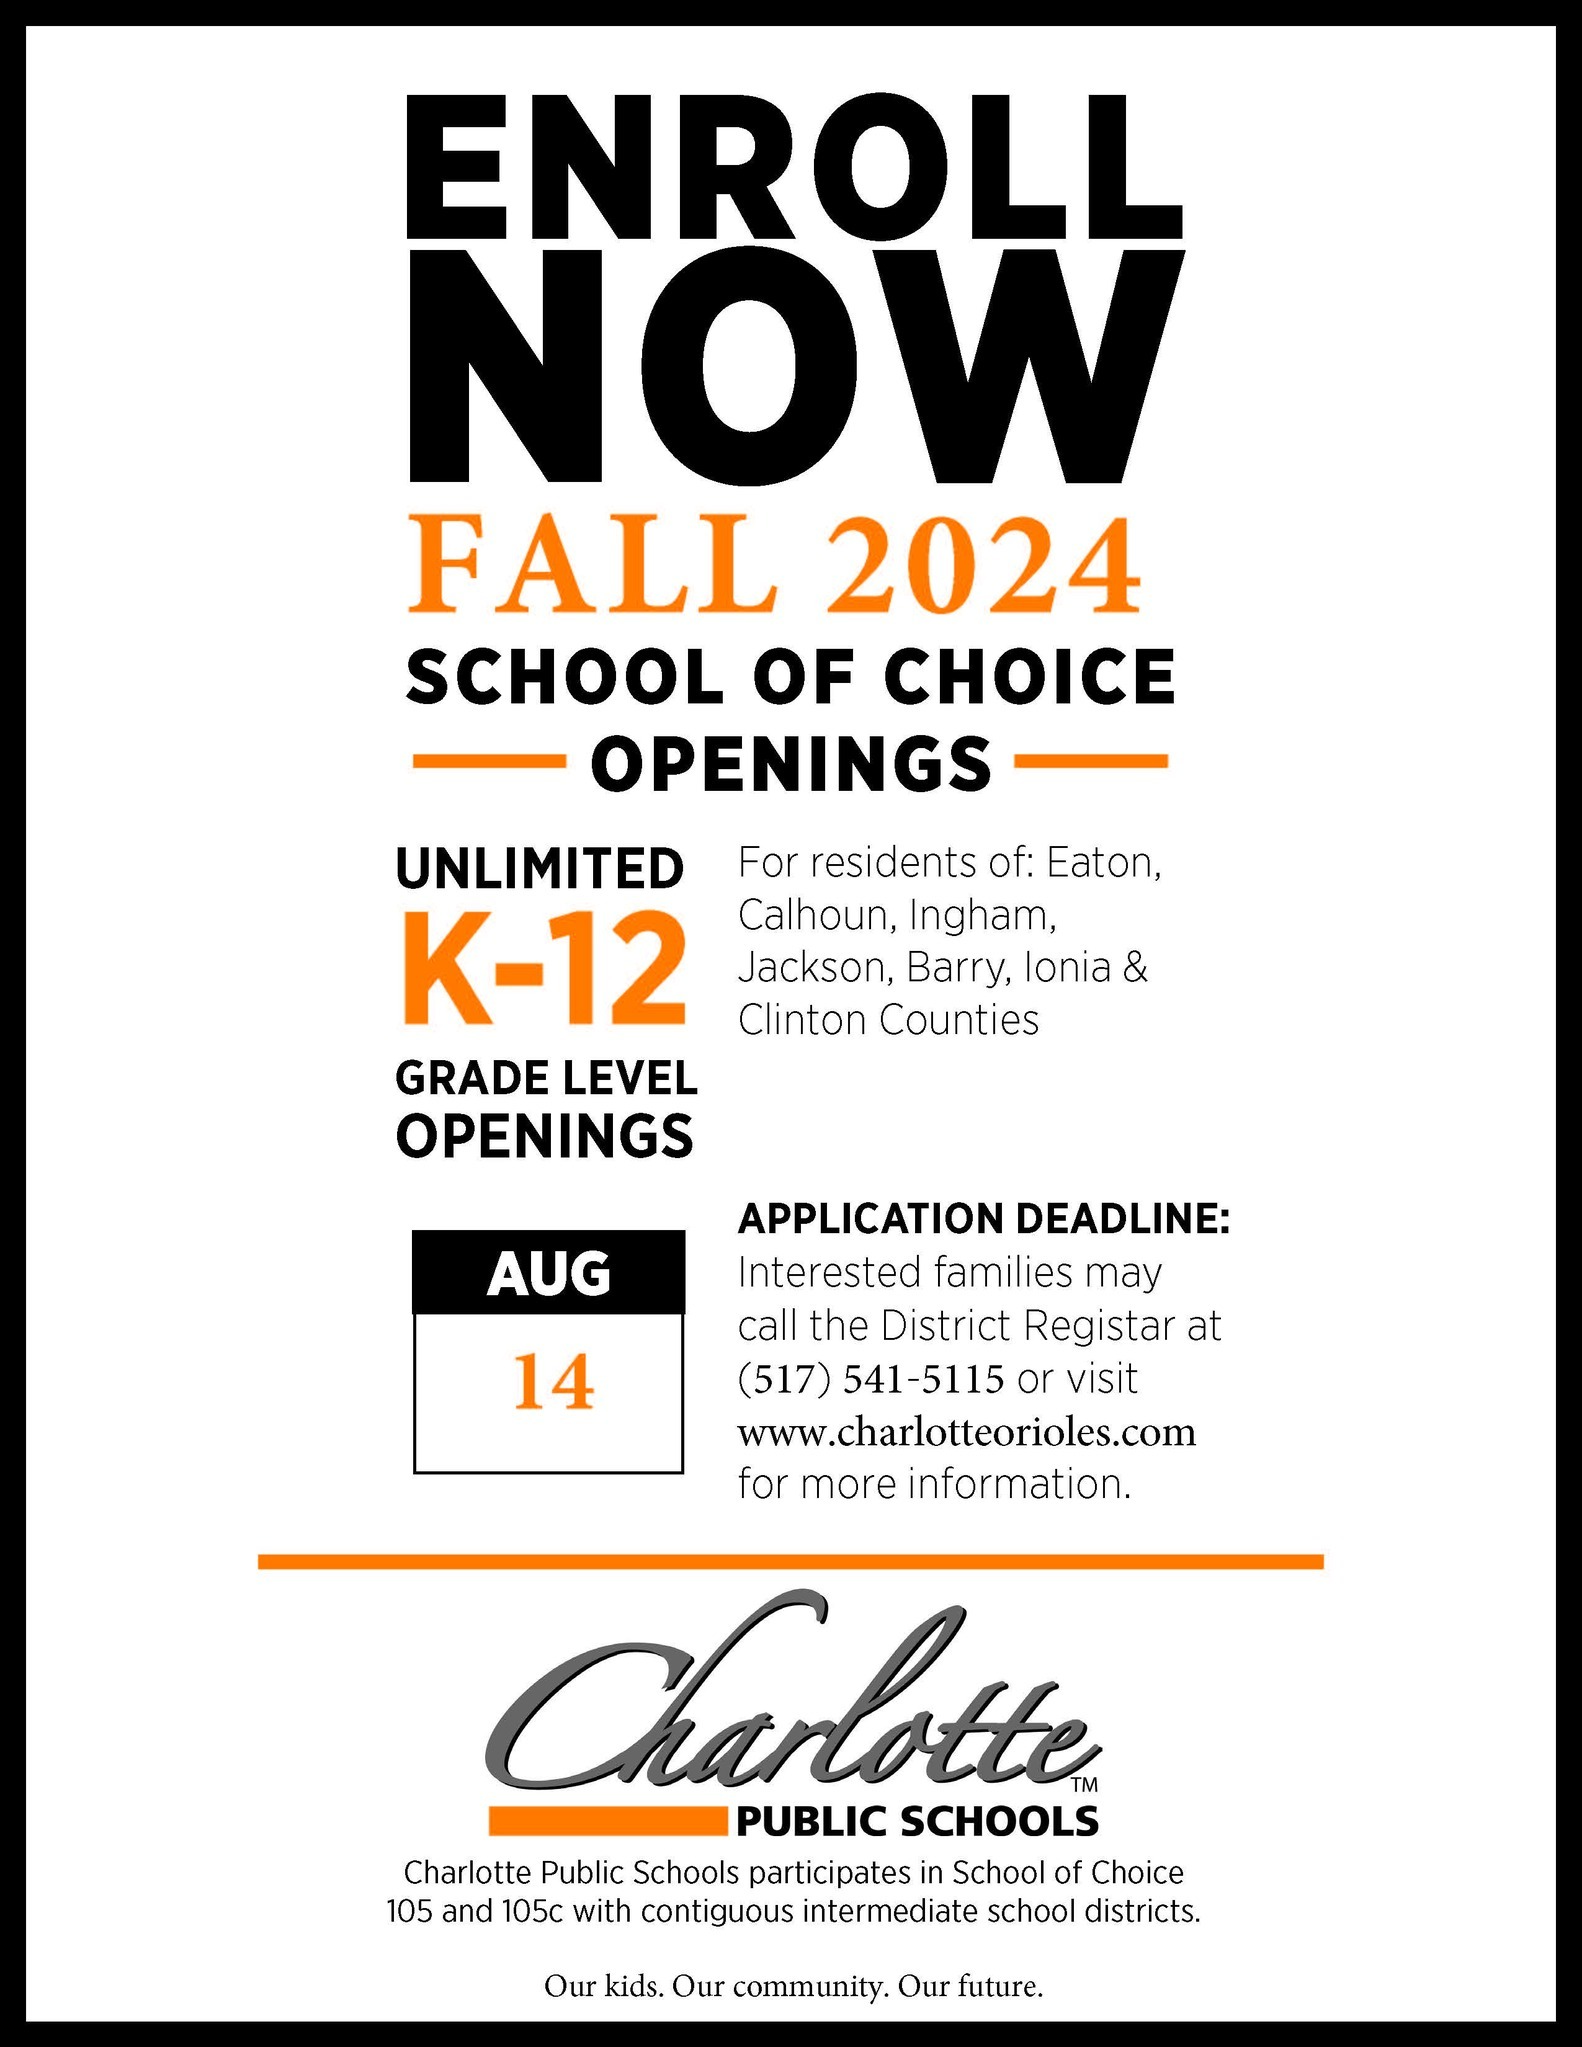 Enroll now for Fall 2024 Schools of Choice openings. August 14 application deadline, call 517.541.5115